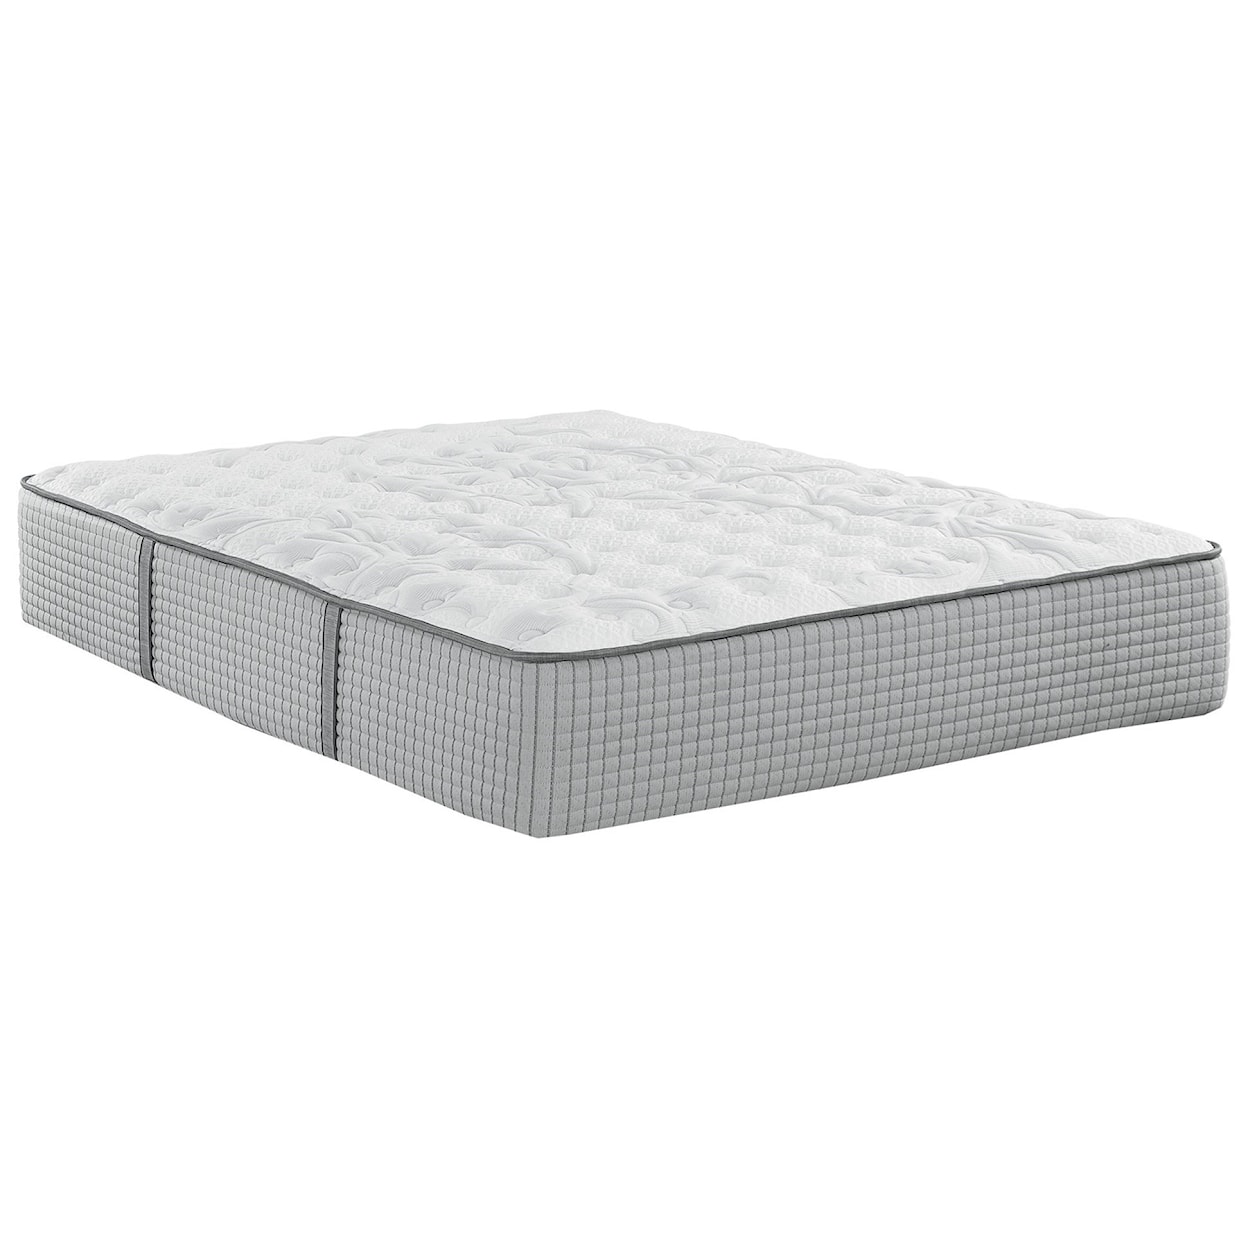 Restonic Biltmore House Firm Full Firm Coil on Coil Mattress